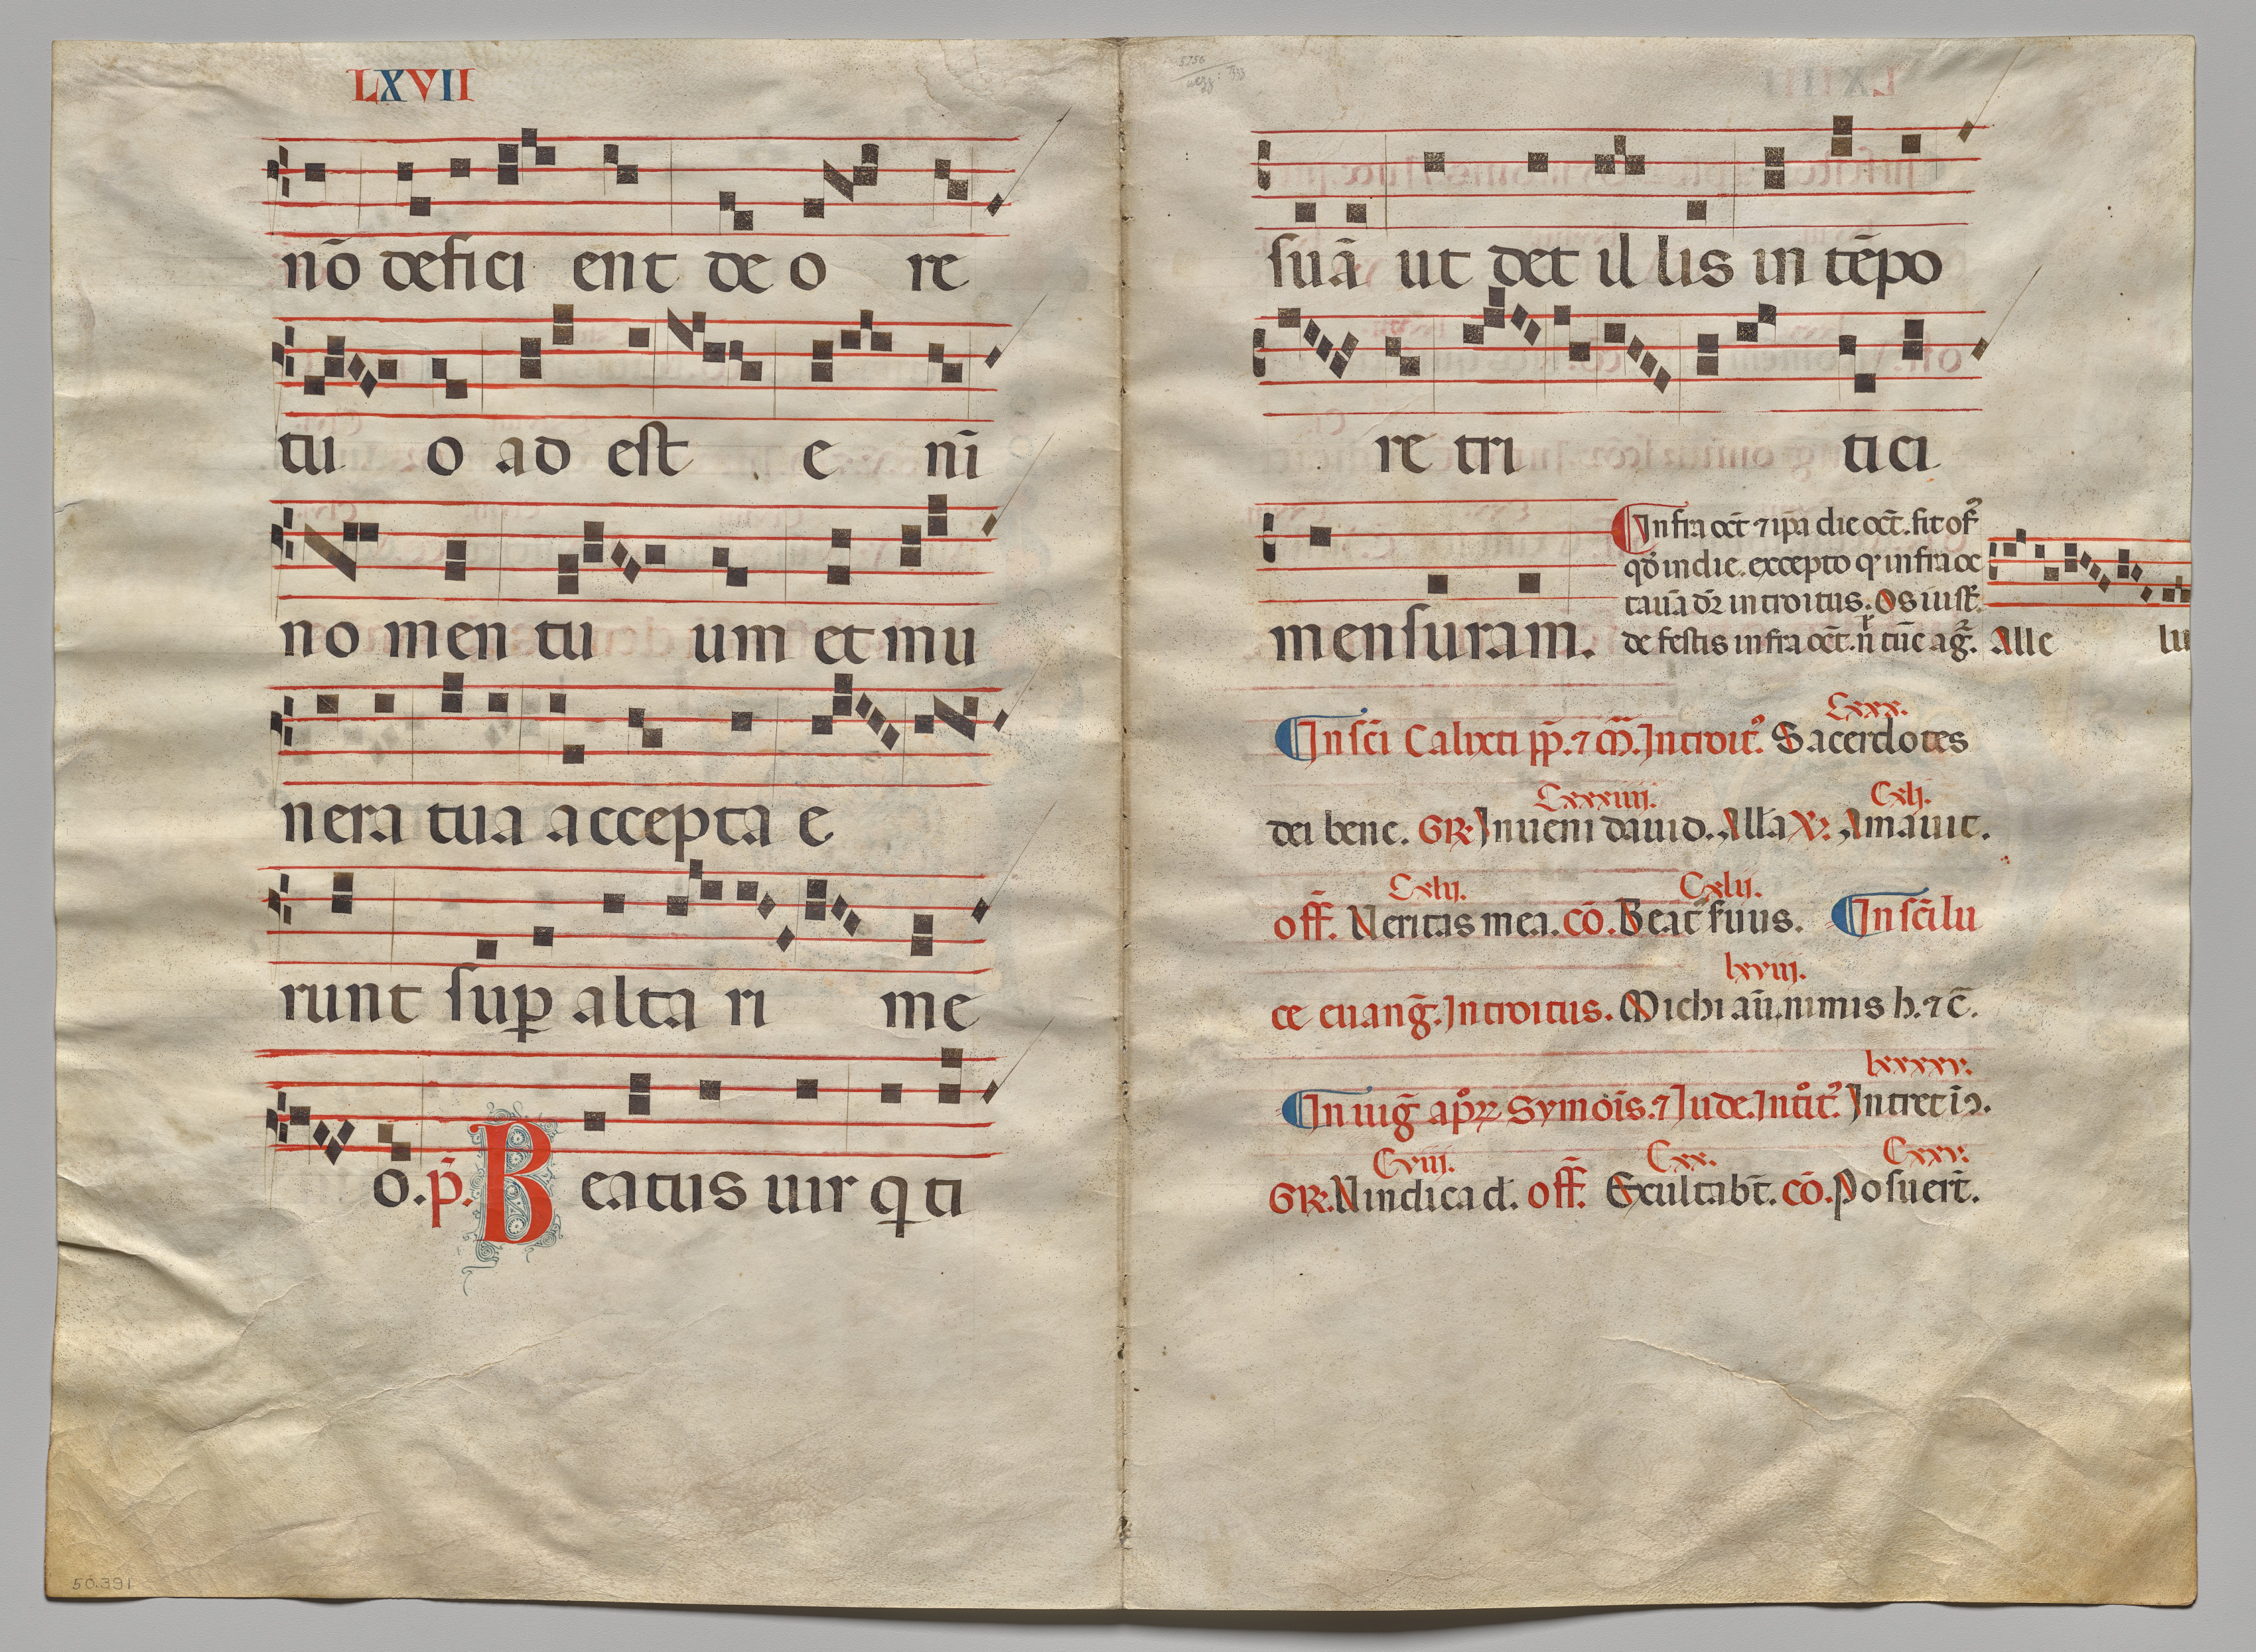 Bifolio from a Gradual:  Music and Text (verso)